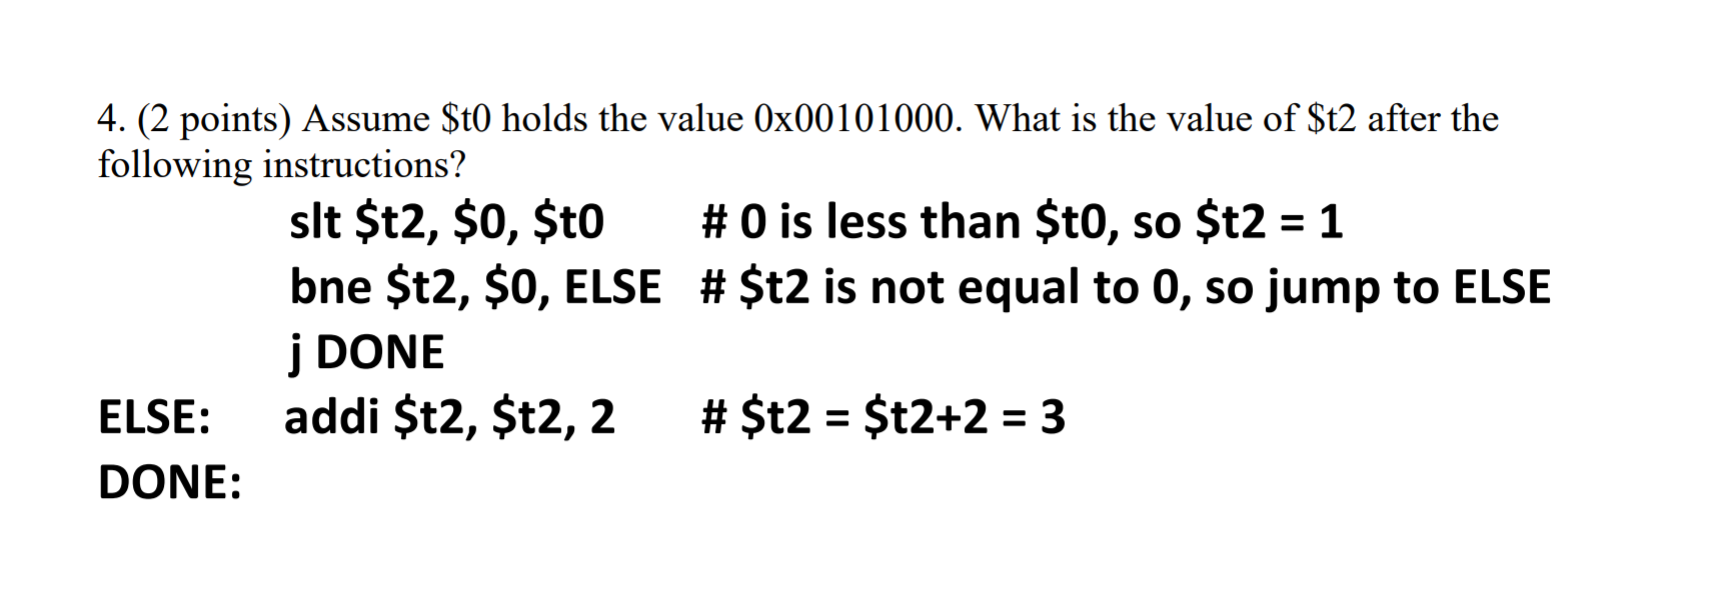 Solved 4. (2 points) Assume $t0 holds the value 0x00101000 